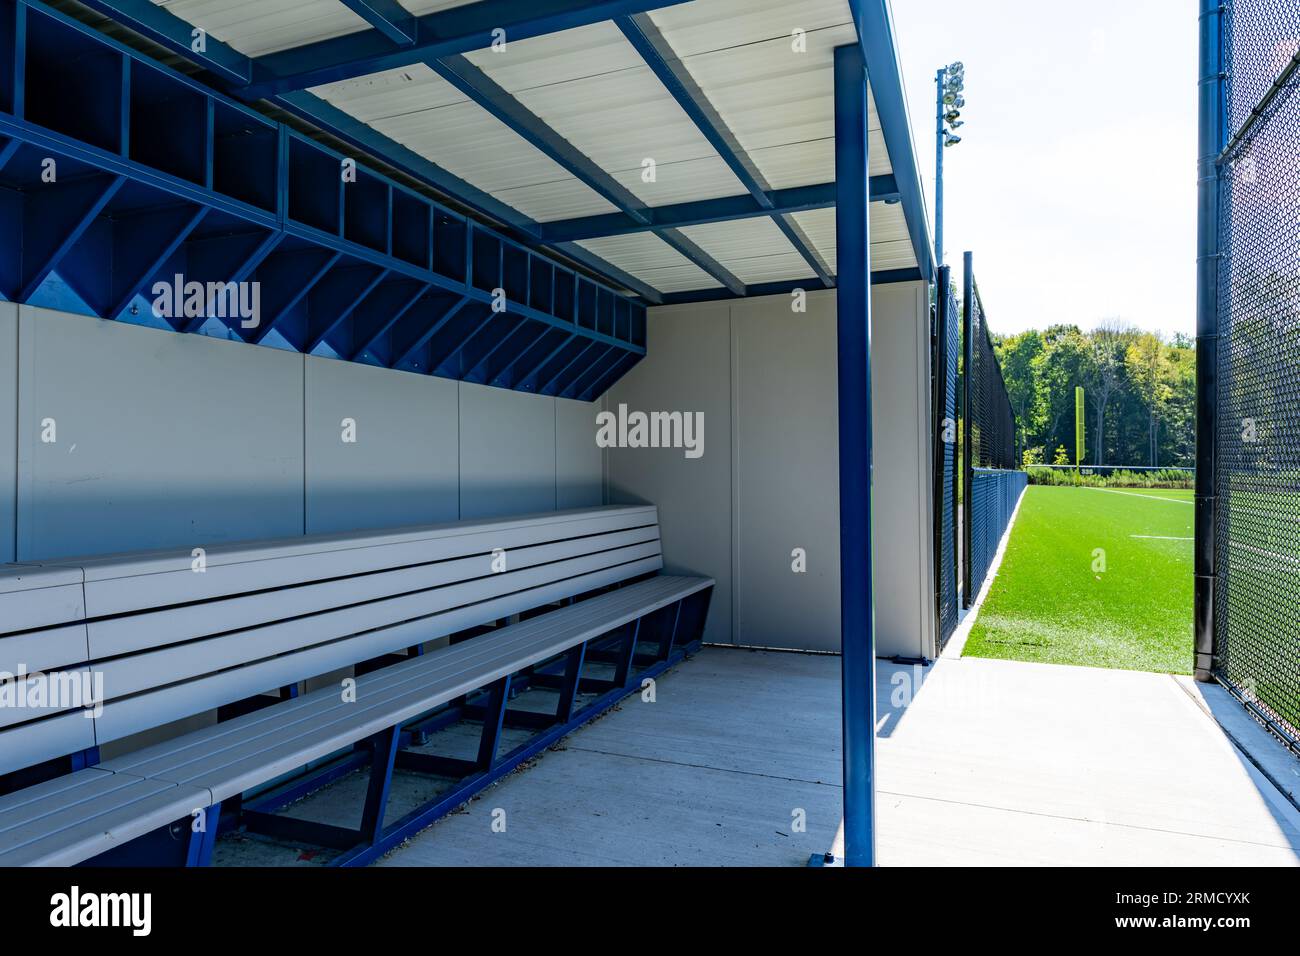 typical nondescript high school baseball third base dugout. No people visible. Not a ticketed event. Stock Photo